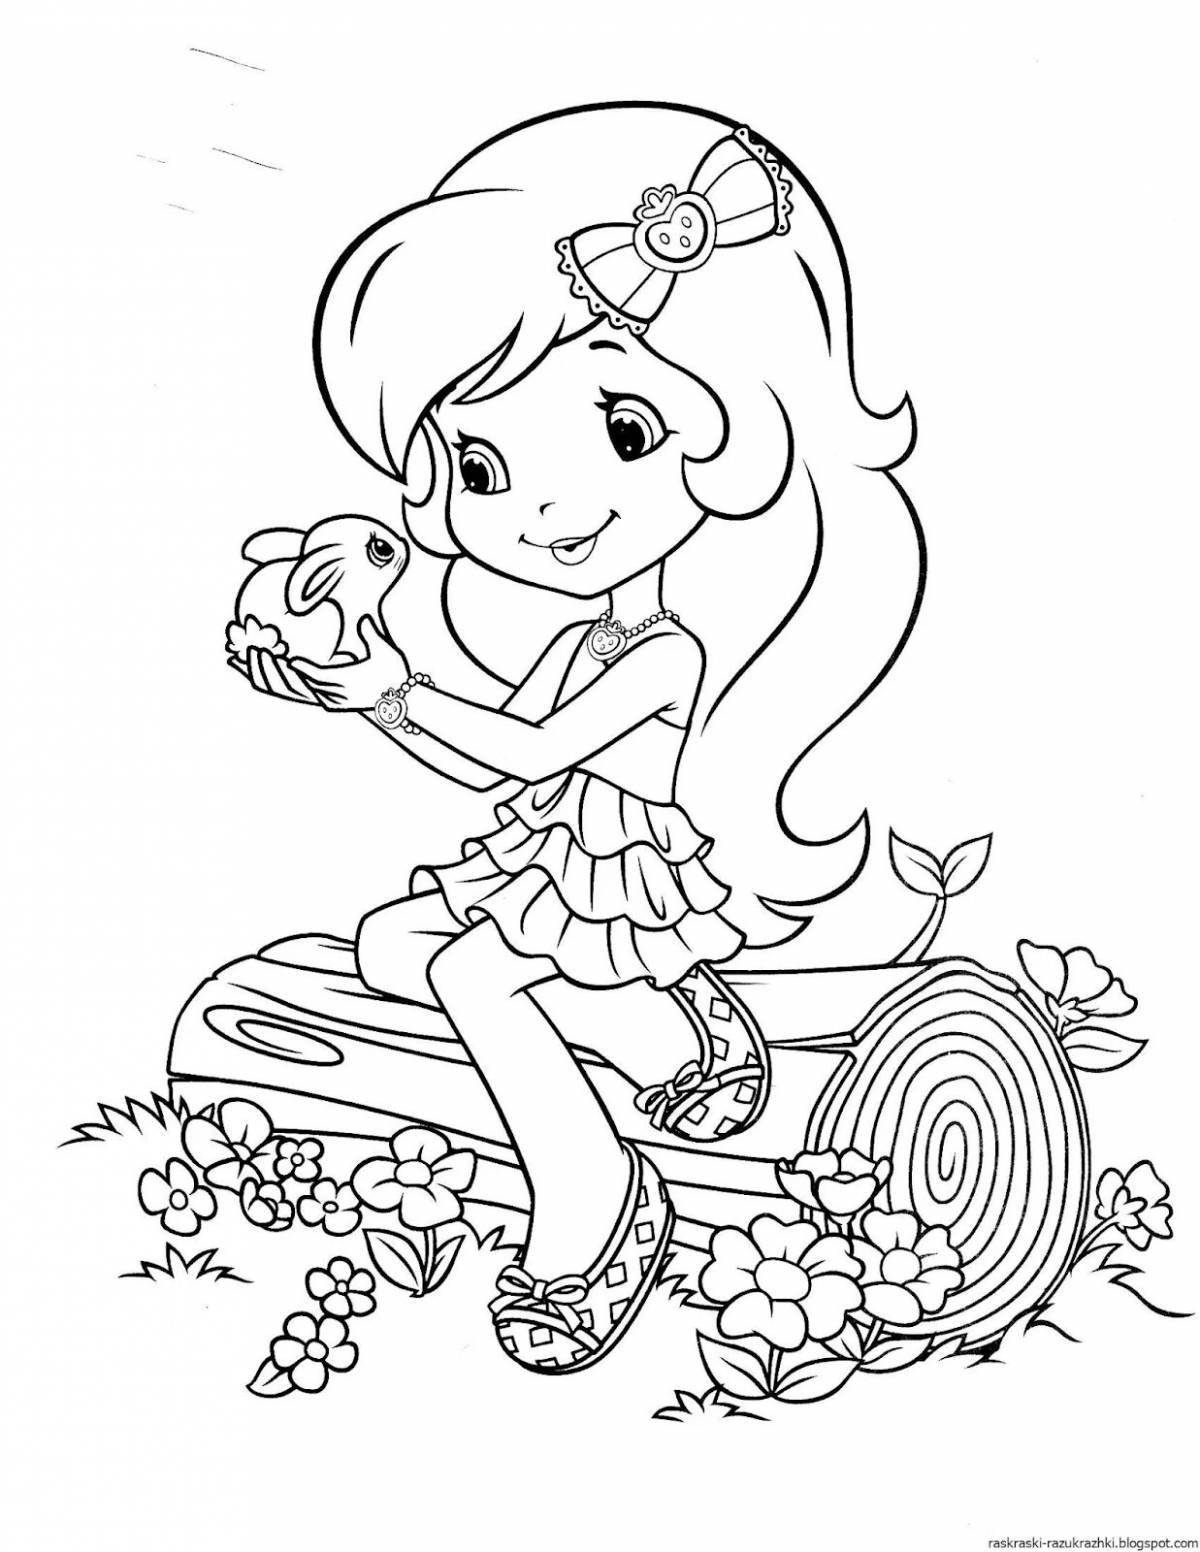 Coloring book for girls 7-8 years old